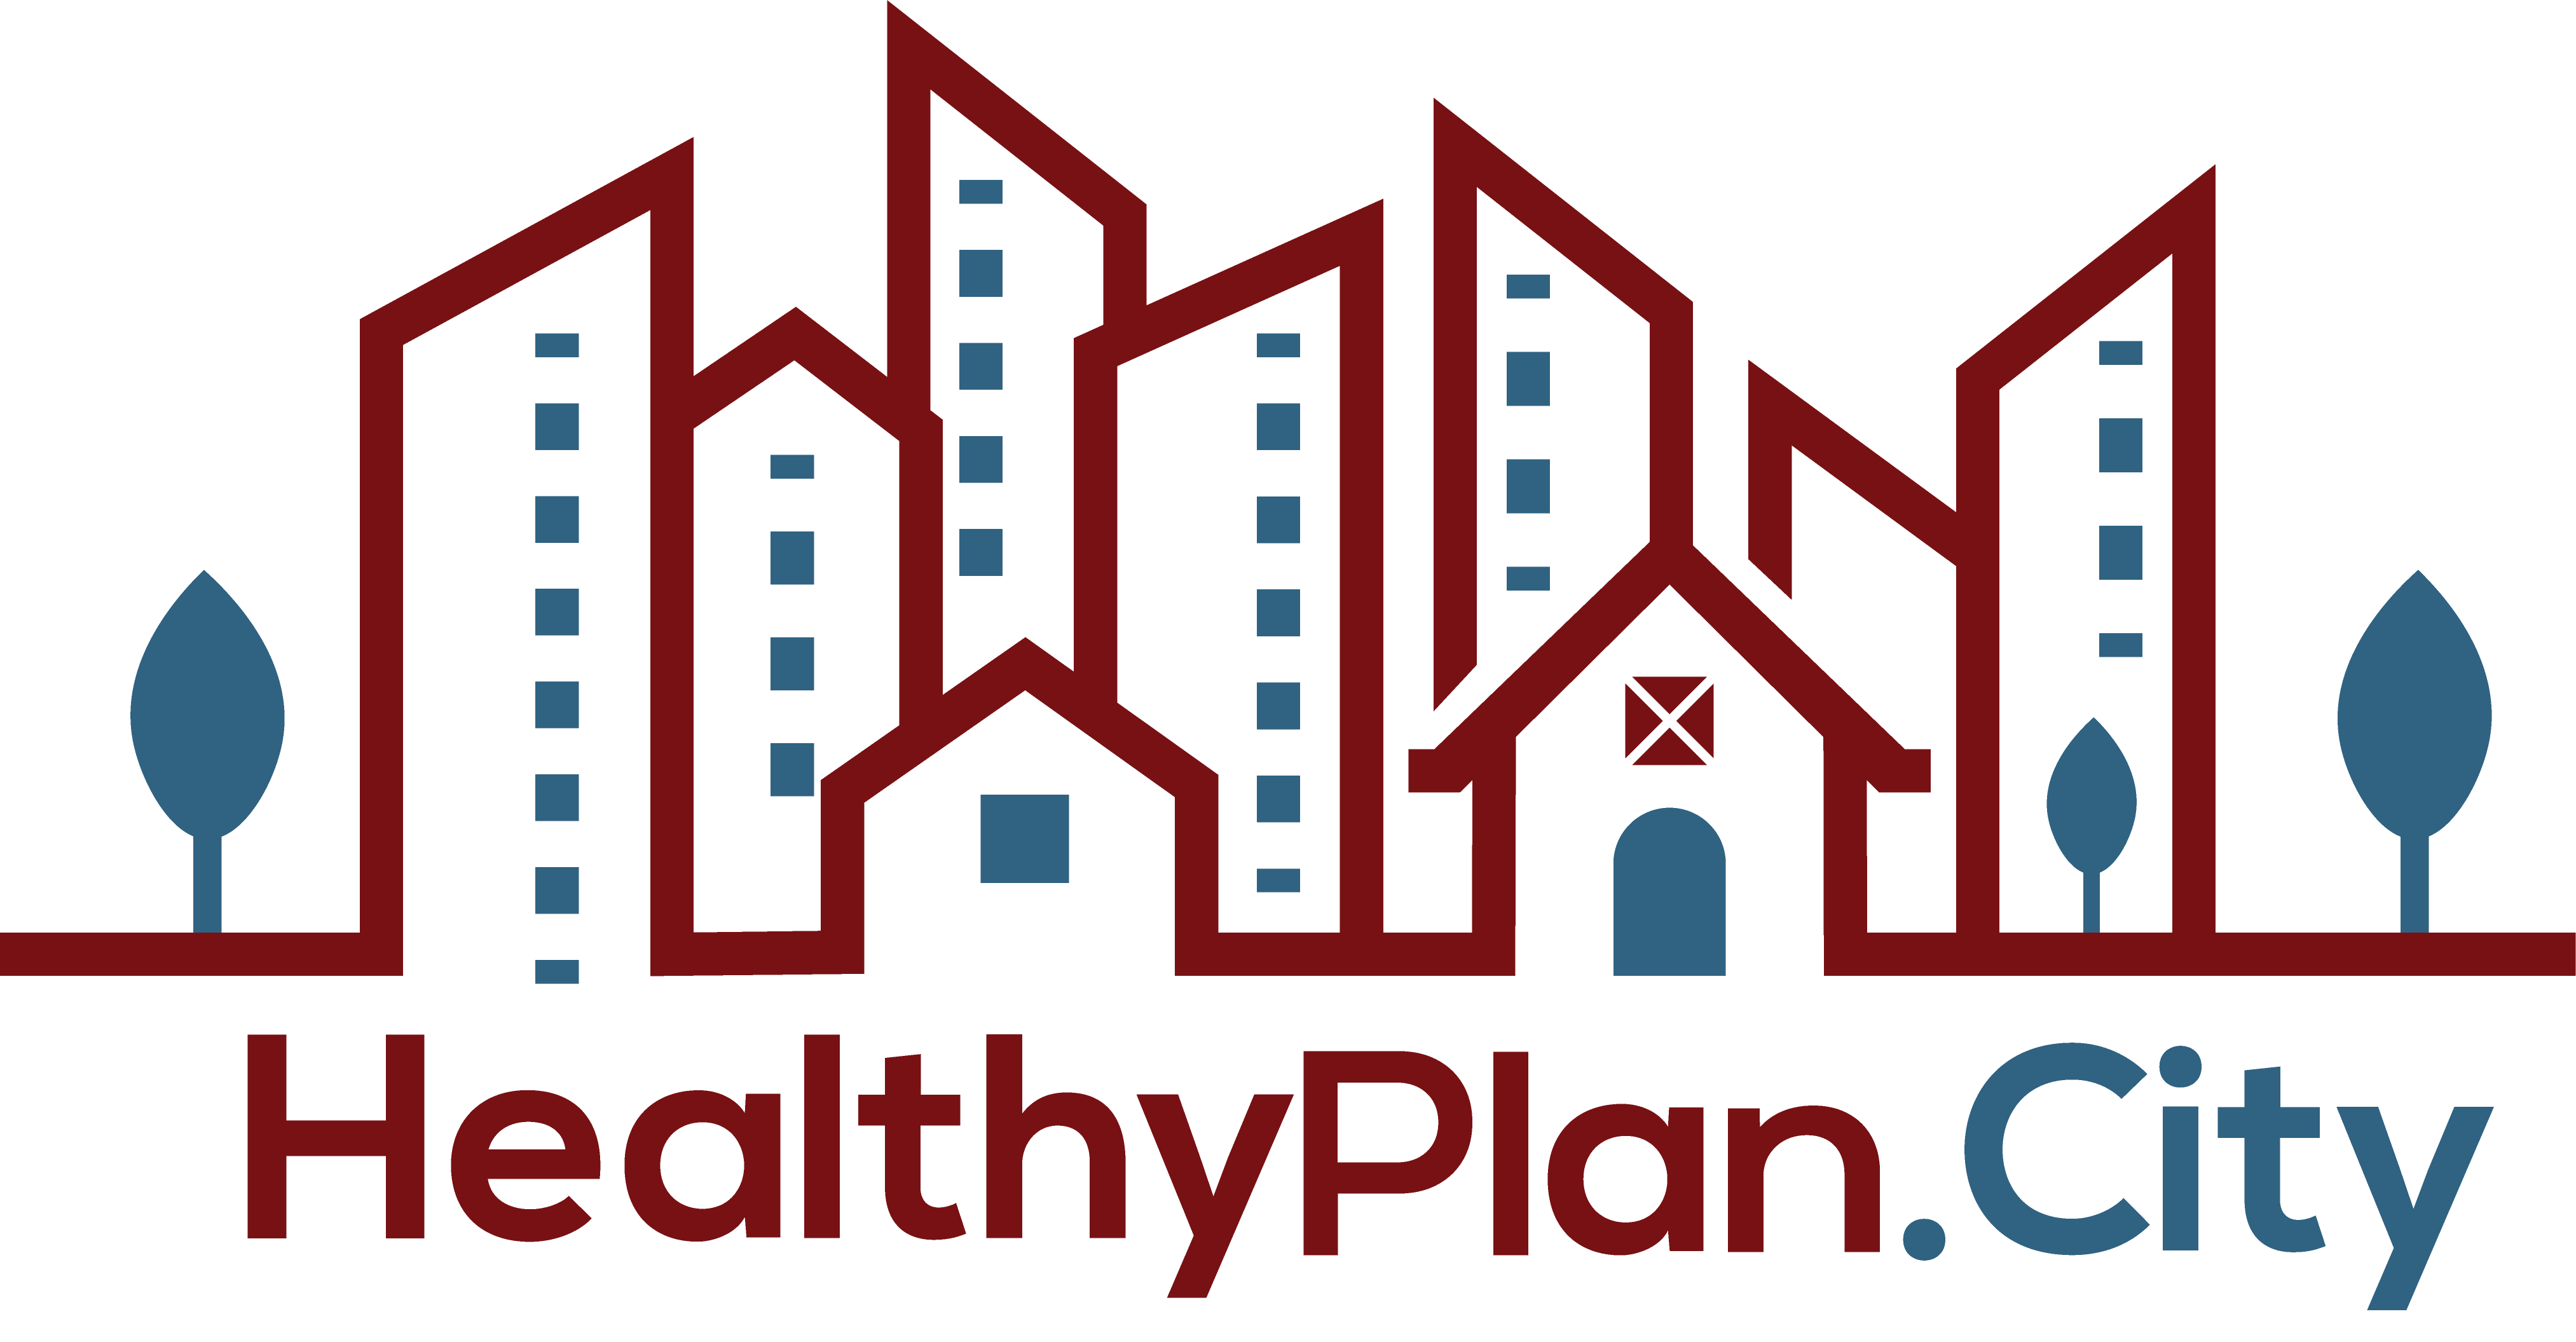 The HealthyPlan.City logo: a simple city outline with HealthyPlan.City in text below. 